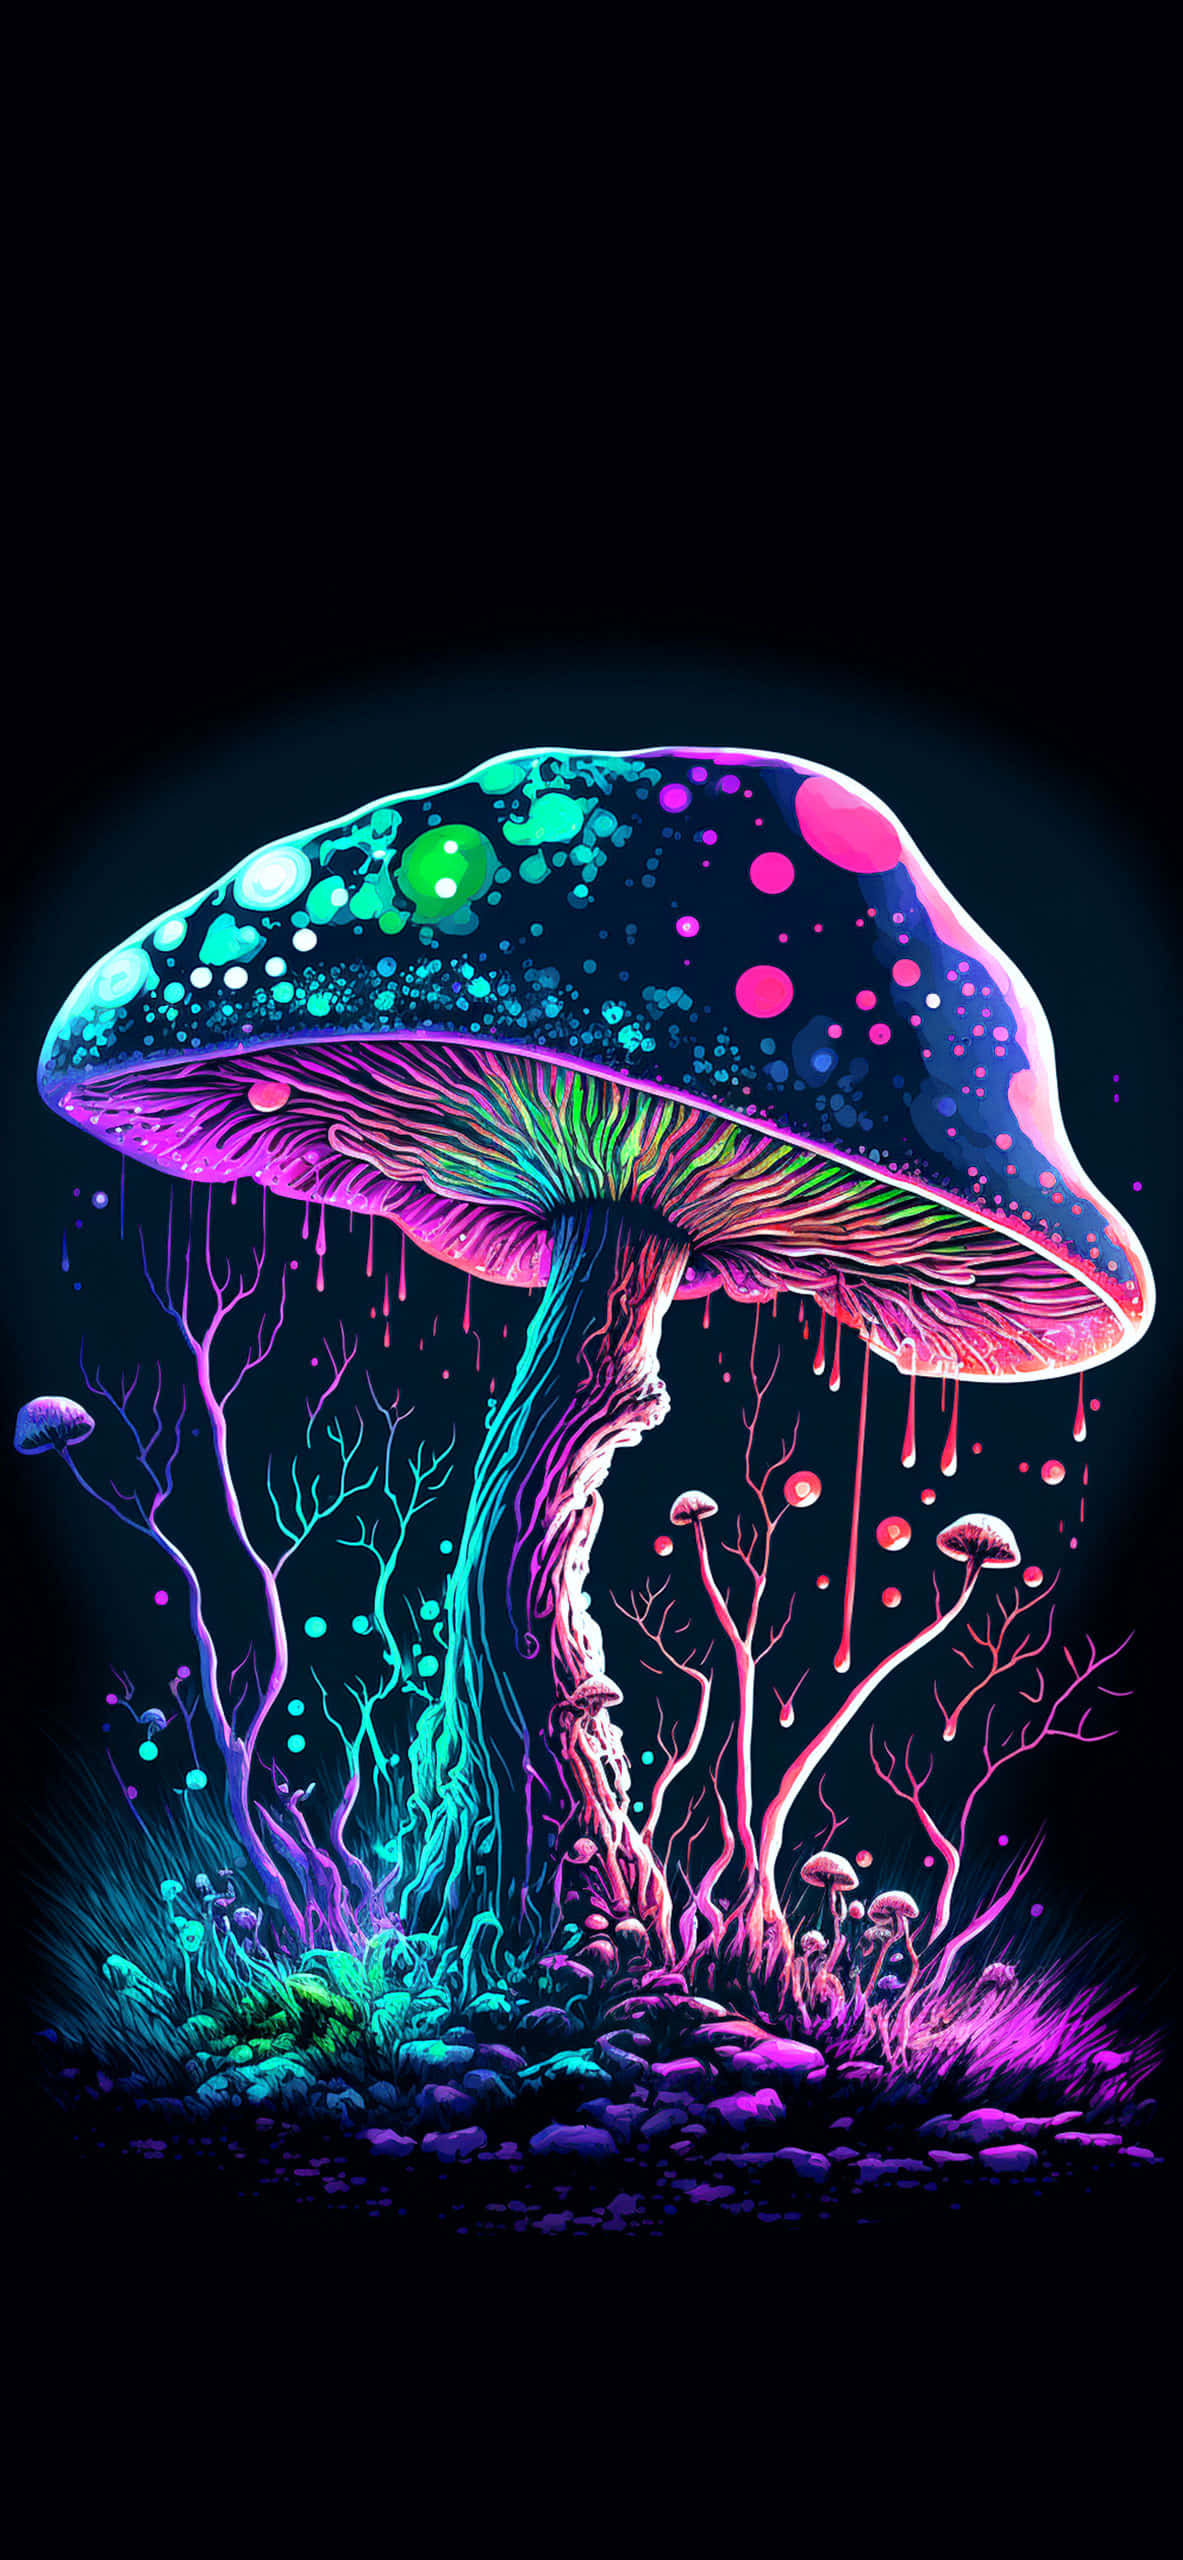 Enter a Magical World with Trippy Mushrooms Wallpaper